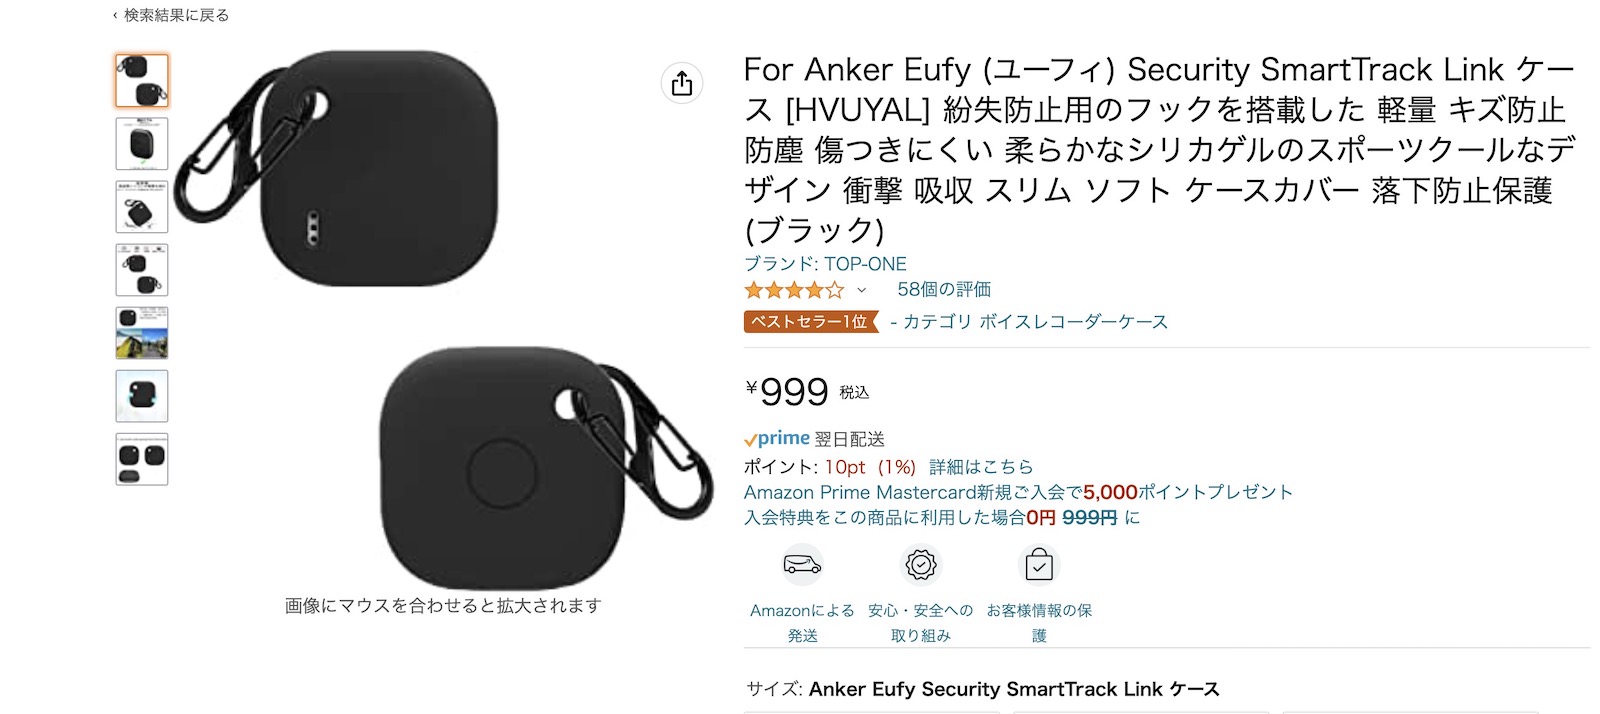 Anker Eufy Security SnmartTrack Link Case